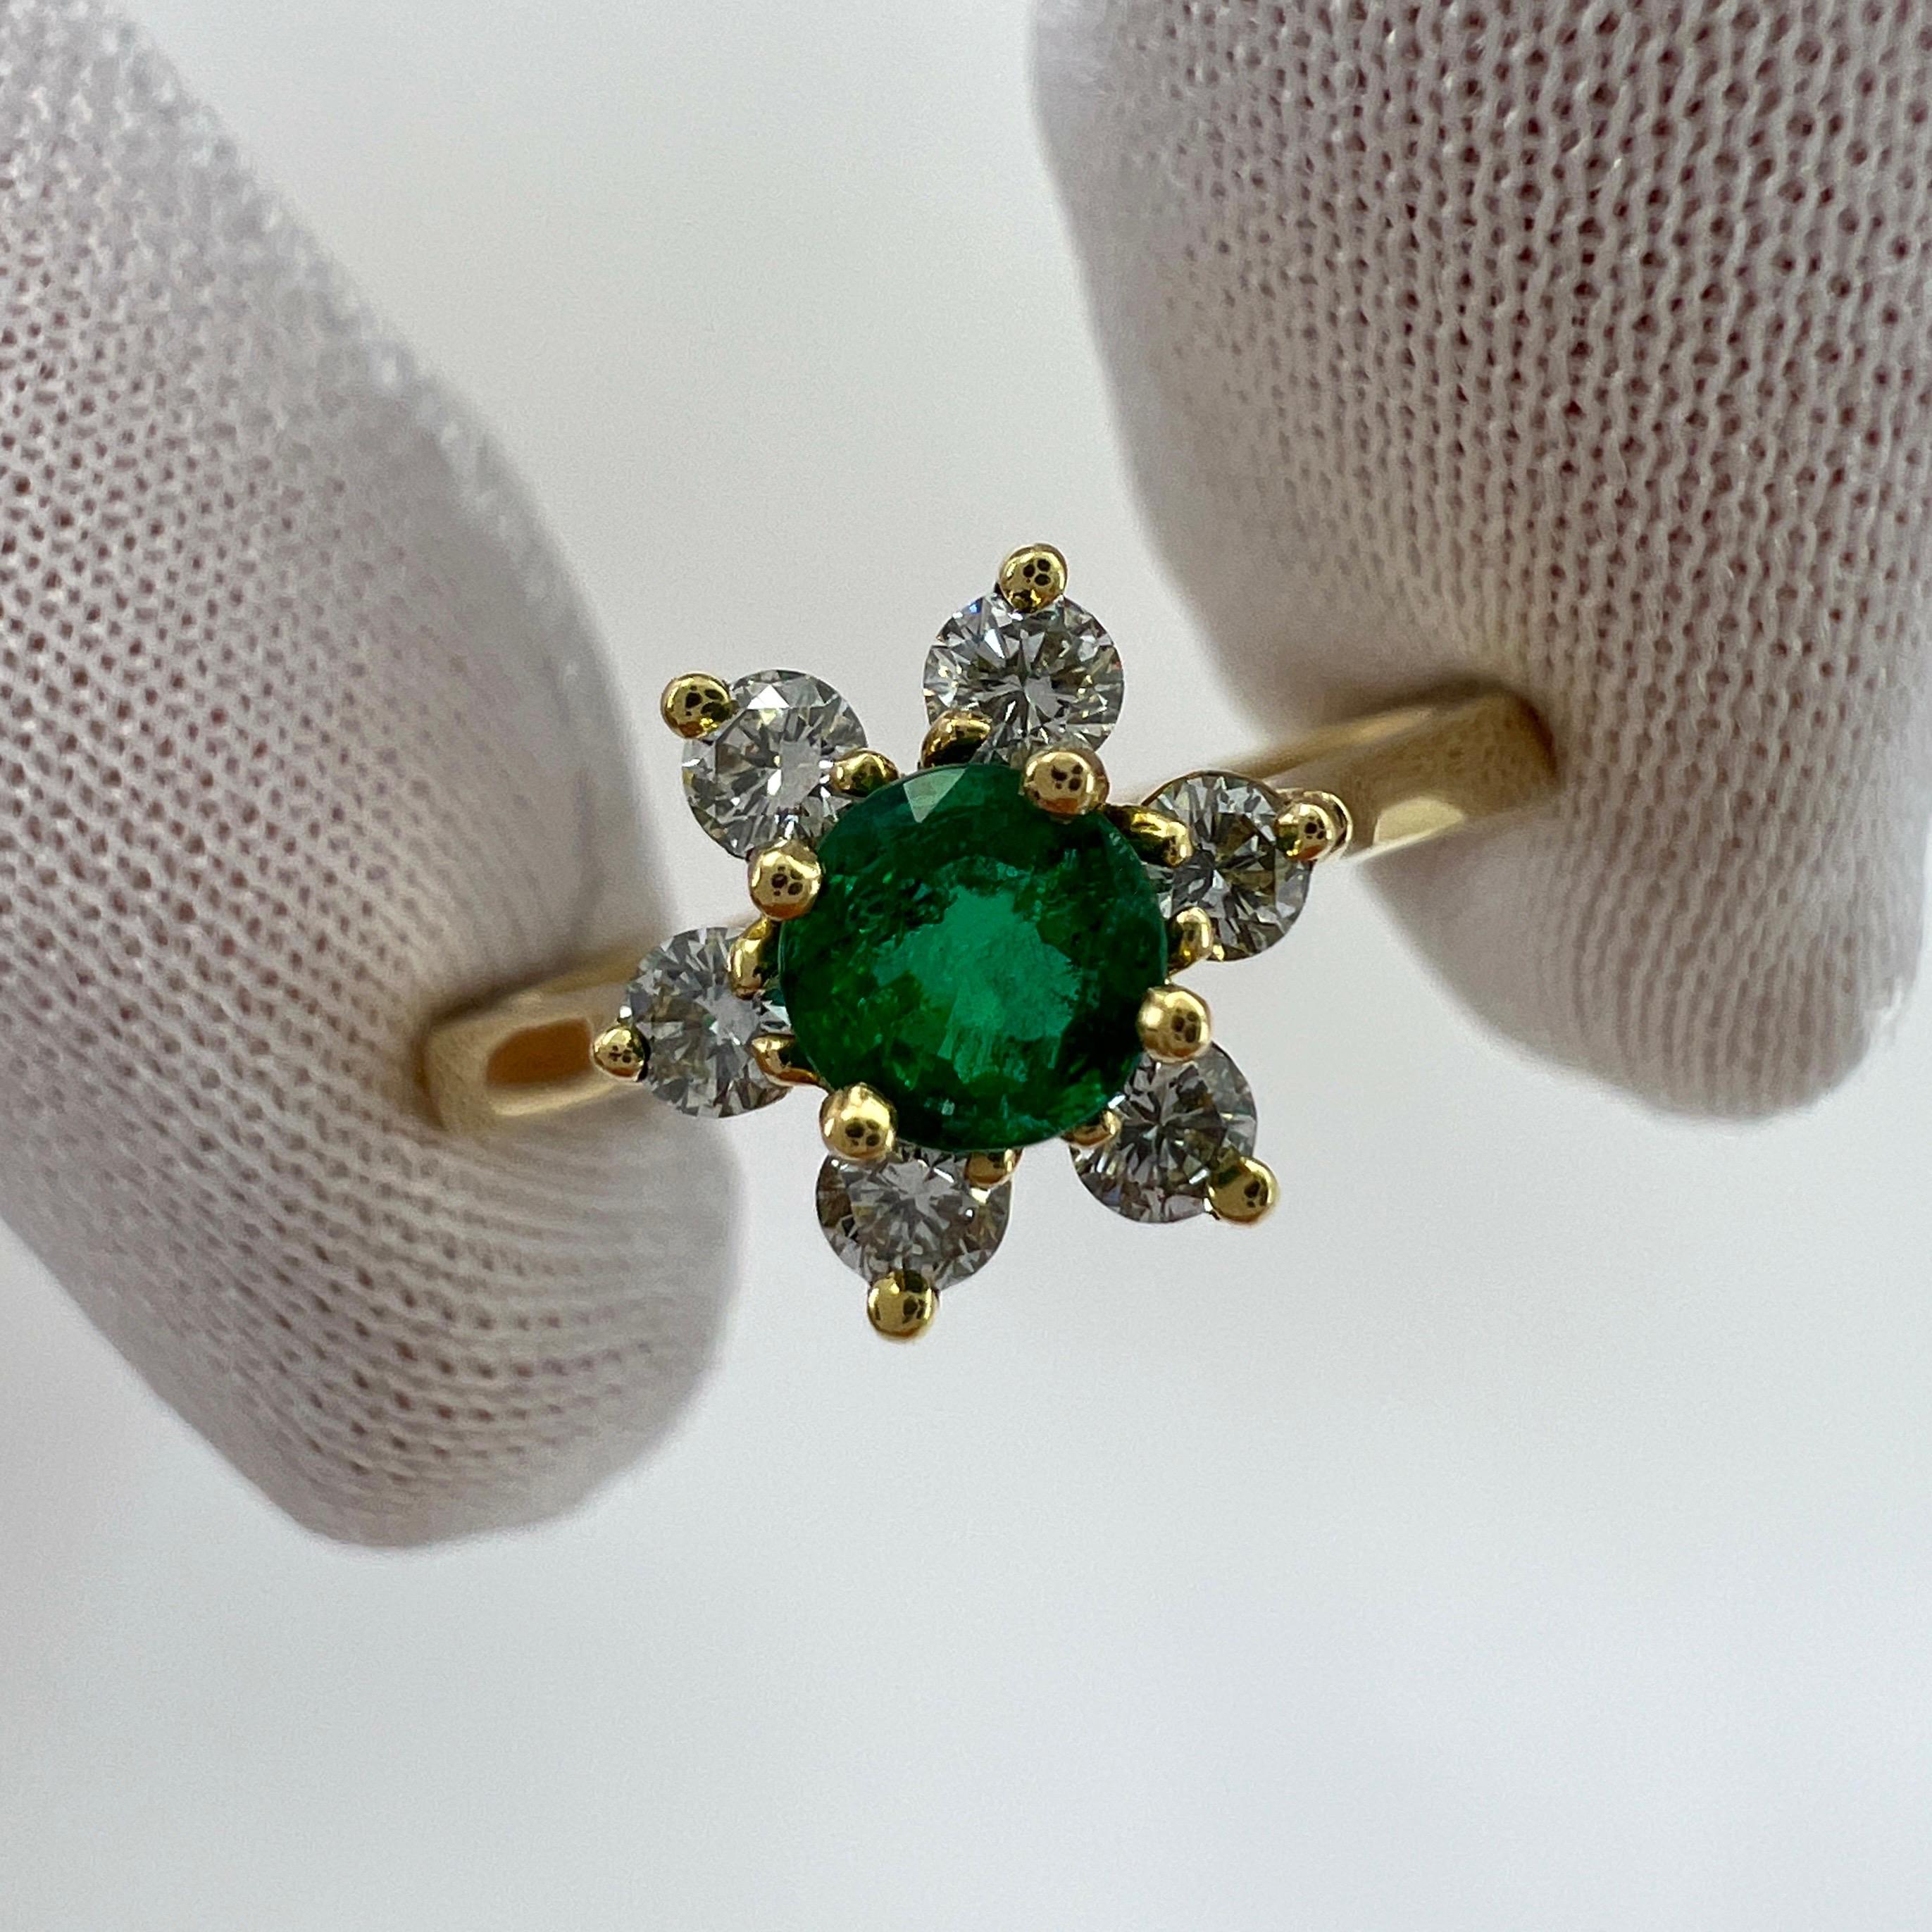 Vintage Tiffany & Co. Natural Round Emerald And Diamond 18k Yellow Gold Flower 'Buttercup' Ring.

A beautifully made yellow gold cluster ring set with a stunning 4.1mm round cut natural emerald centre stone. Superb colour with very good clarity and